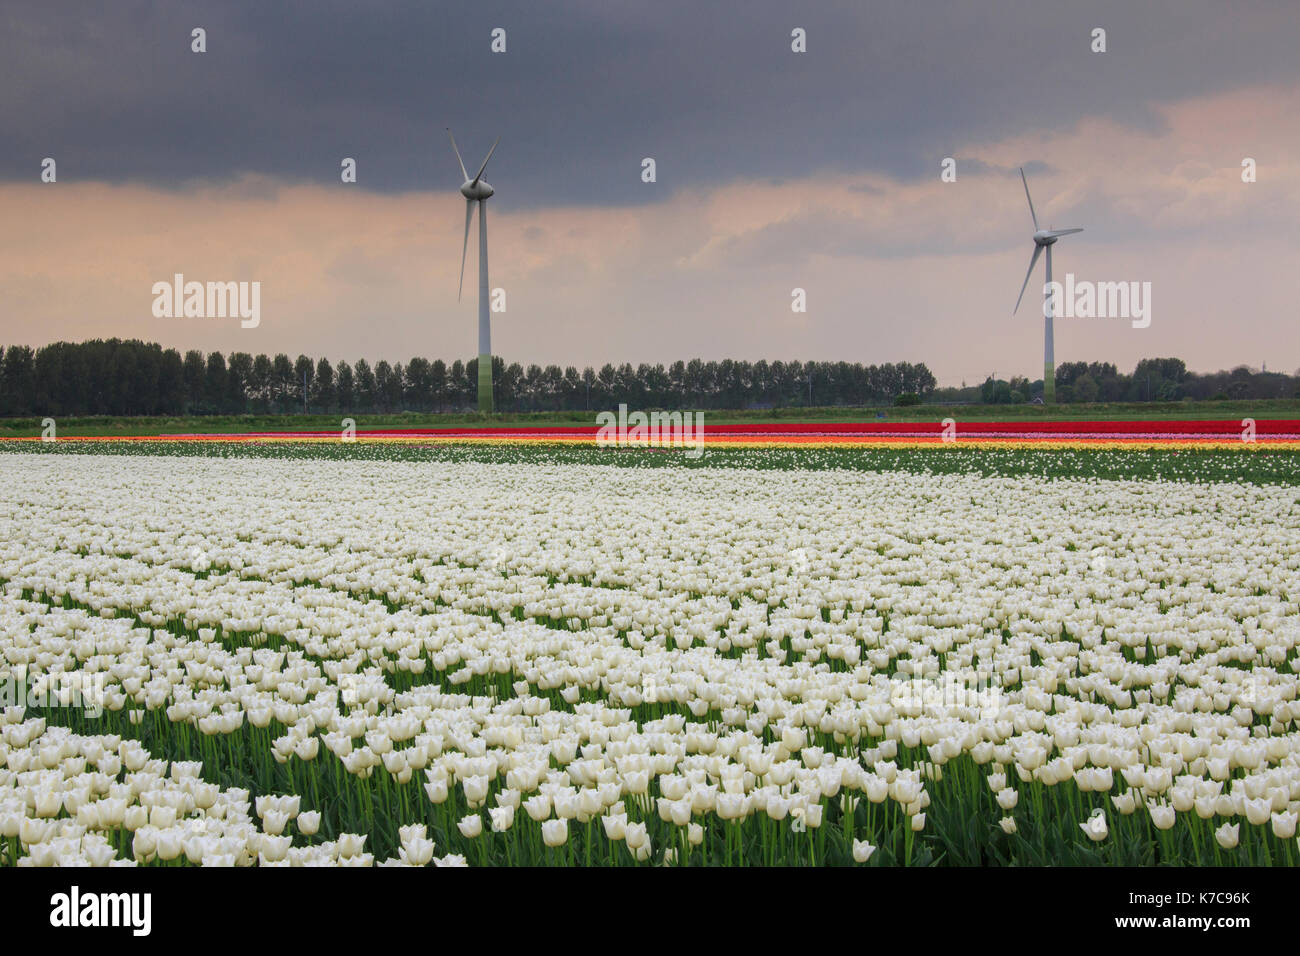 Multicolored tulips surrounded by green meadows and wind turbines Berkmeer Koggenland Netherlands North Holland Europe Stock Photo